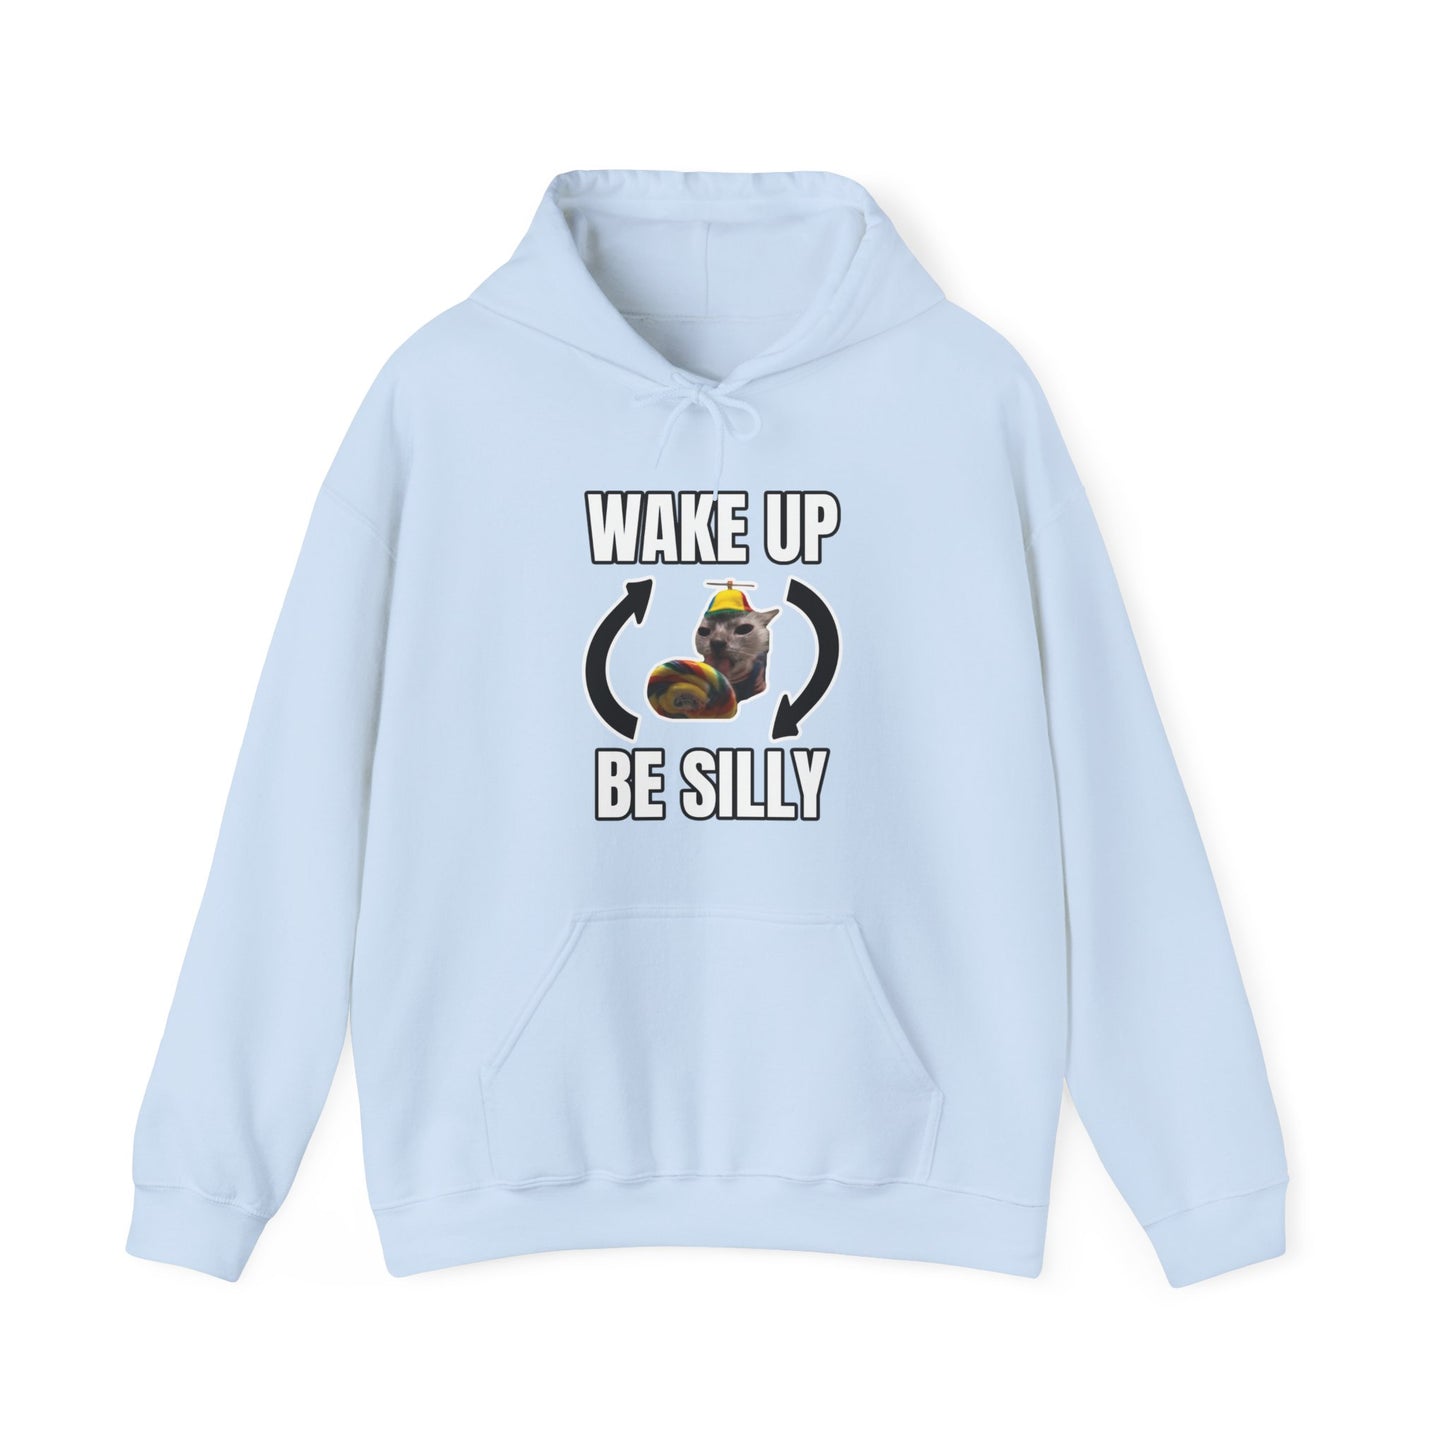 WAKE UP BE SILLY HOODIE